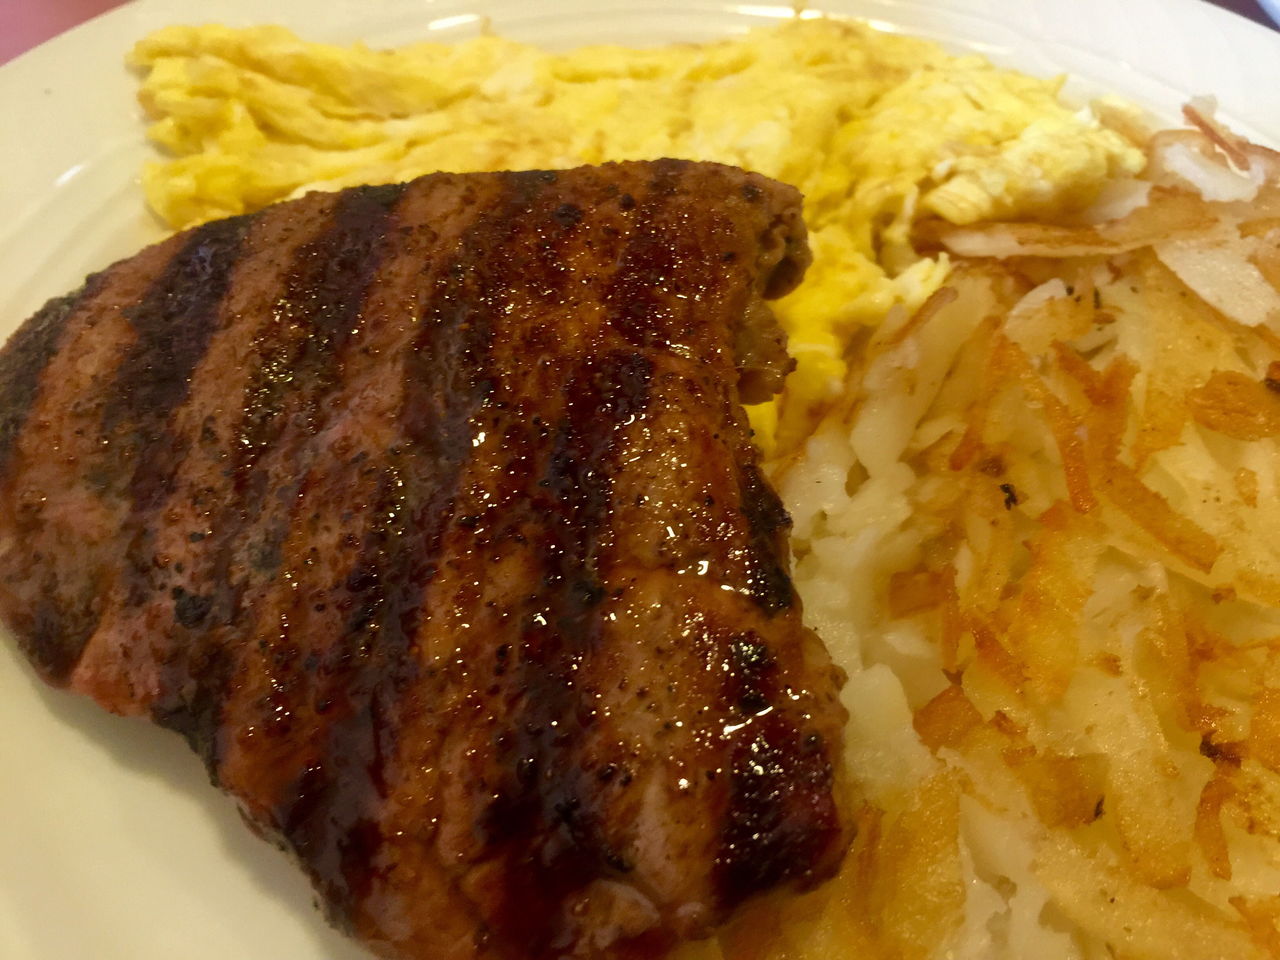 At Cliffhanger, a breakfast $5.99 plate deal with steak, eggs, hash browns and Texas toast is served all day.